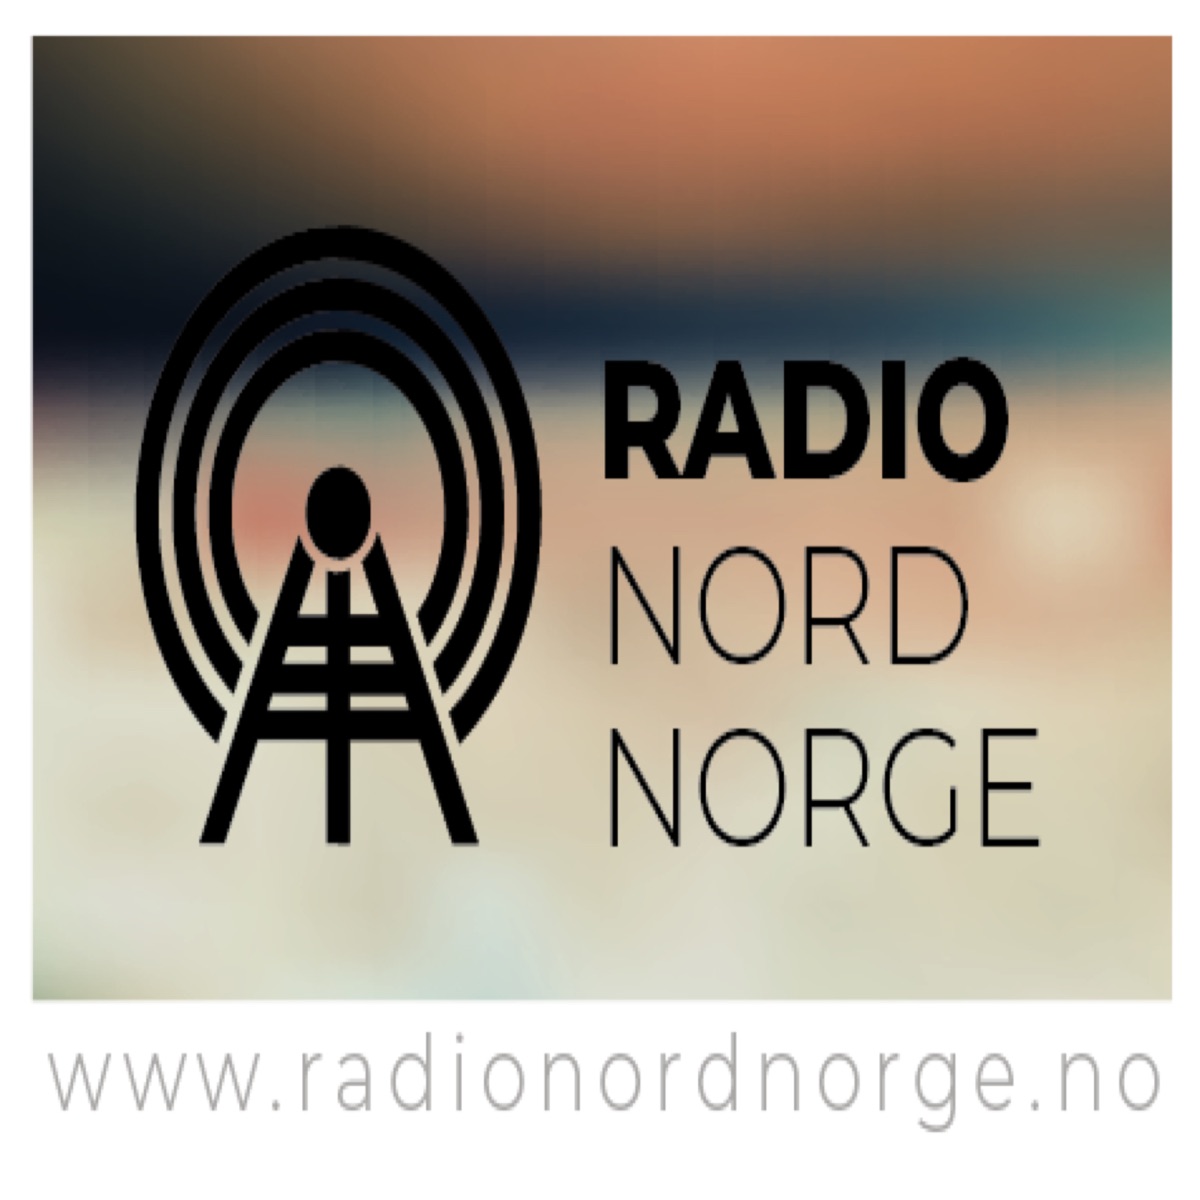 Radio Nord Norge 4 - Album by Radio Nord Norge - Apple Music